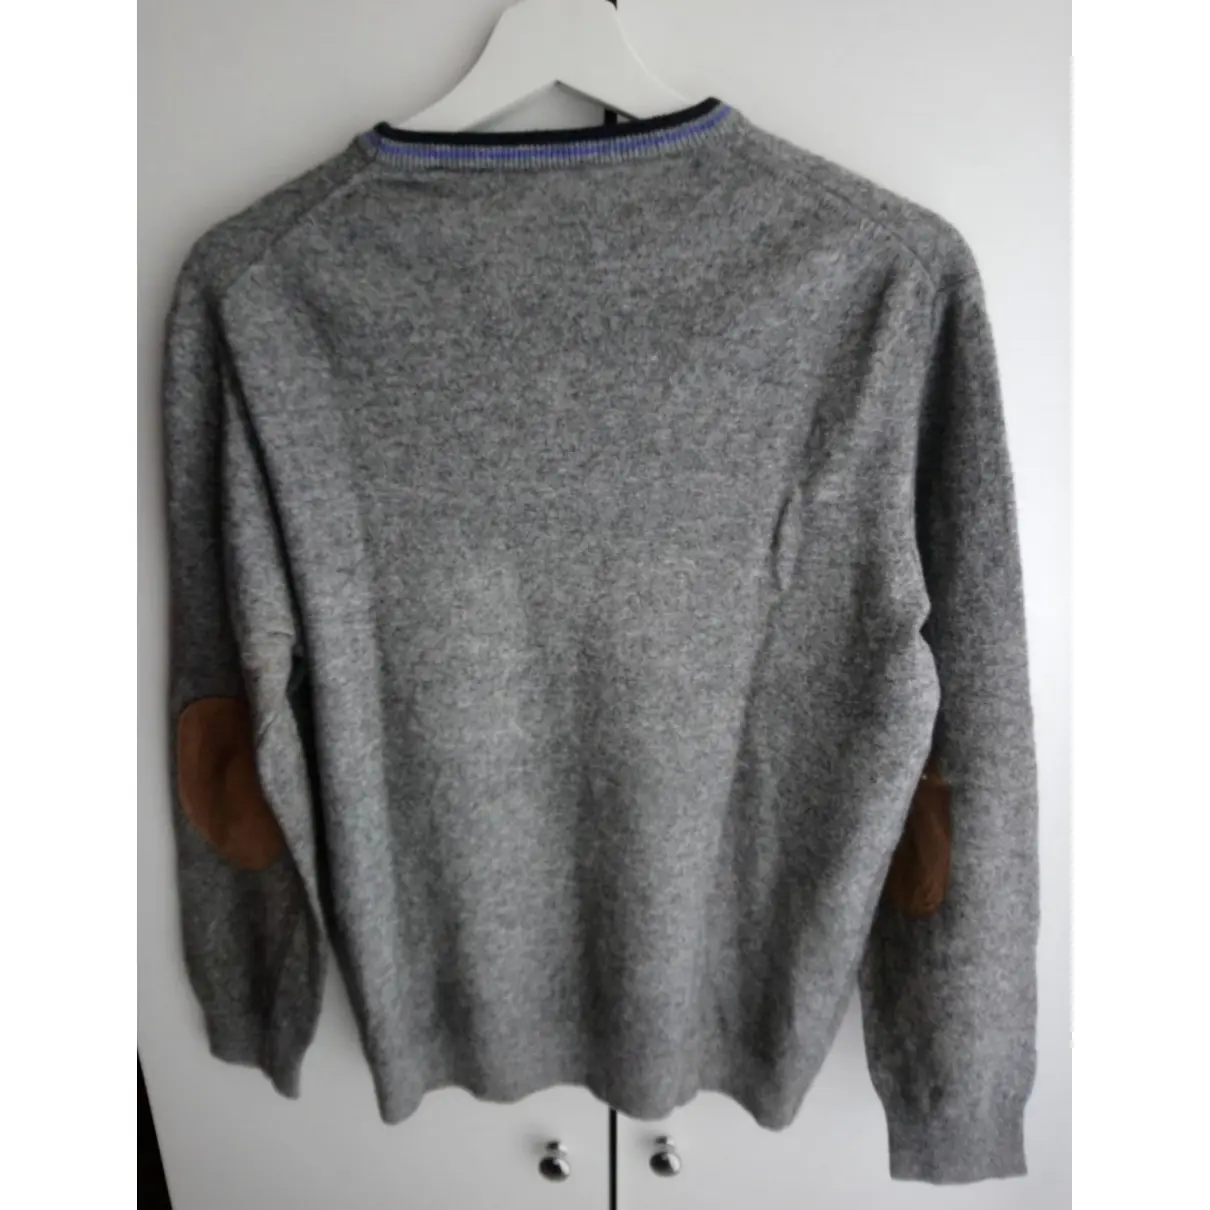 Buy Fred Perry Cashmere sweatshirt online